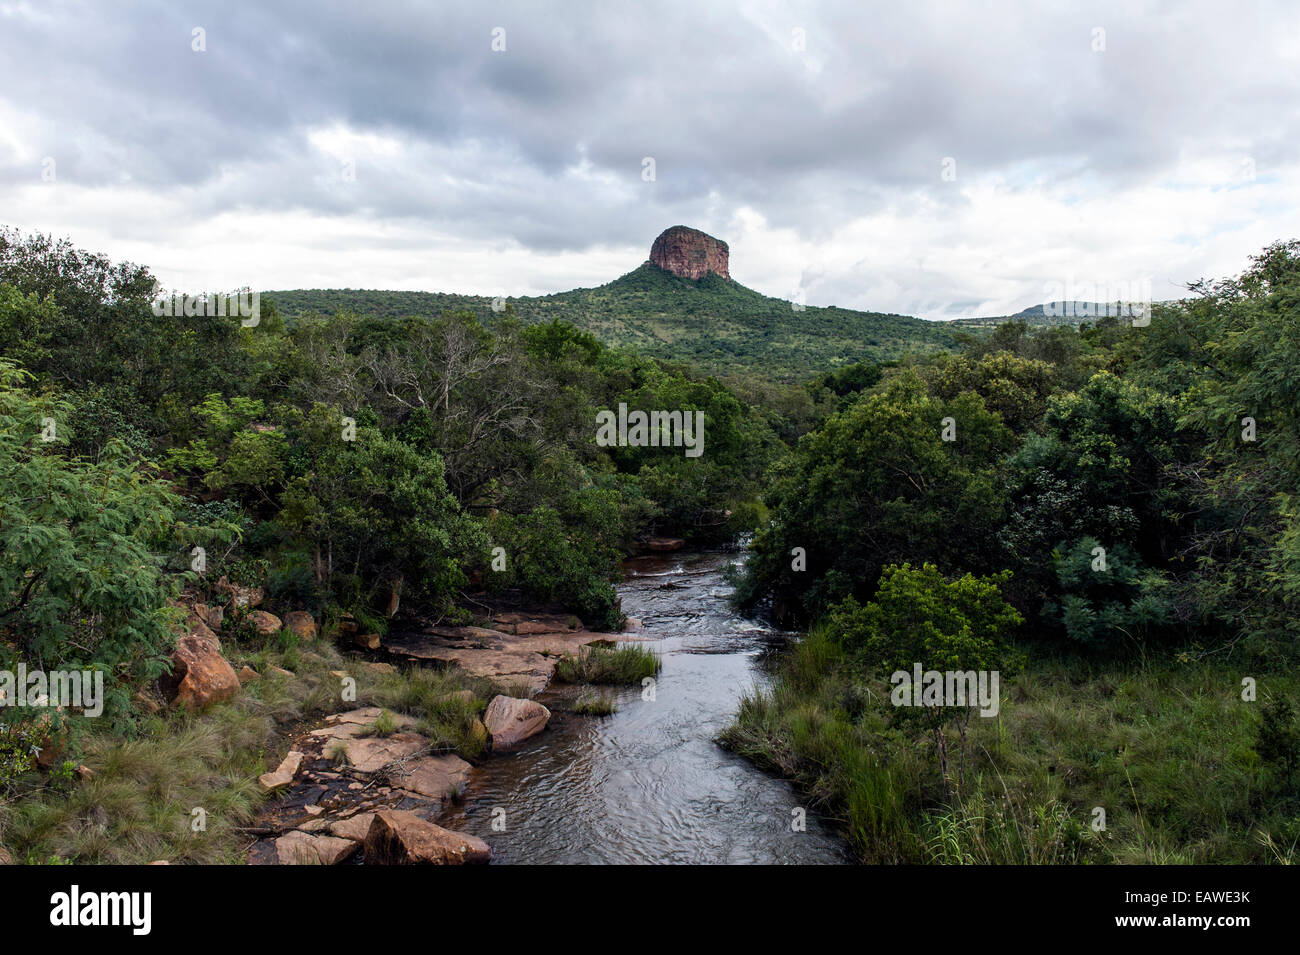 A river cuts through thick scrub and forest beneath a mountain peak. Stock Photo